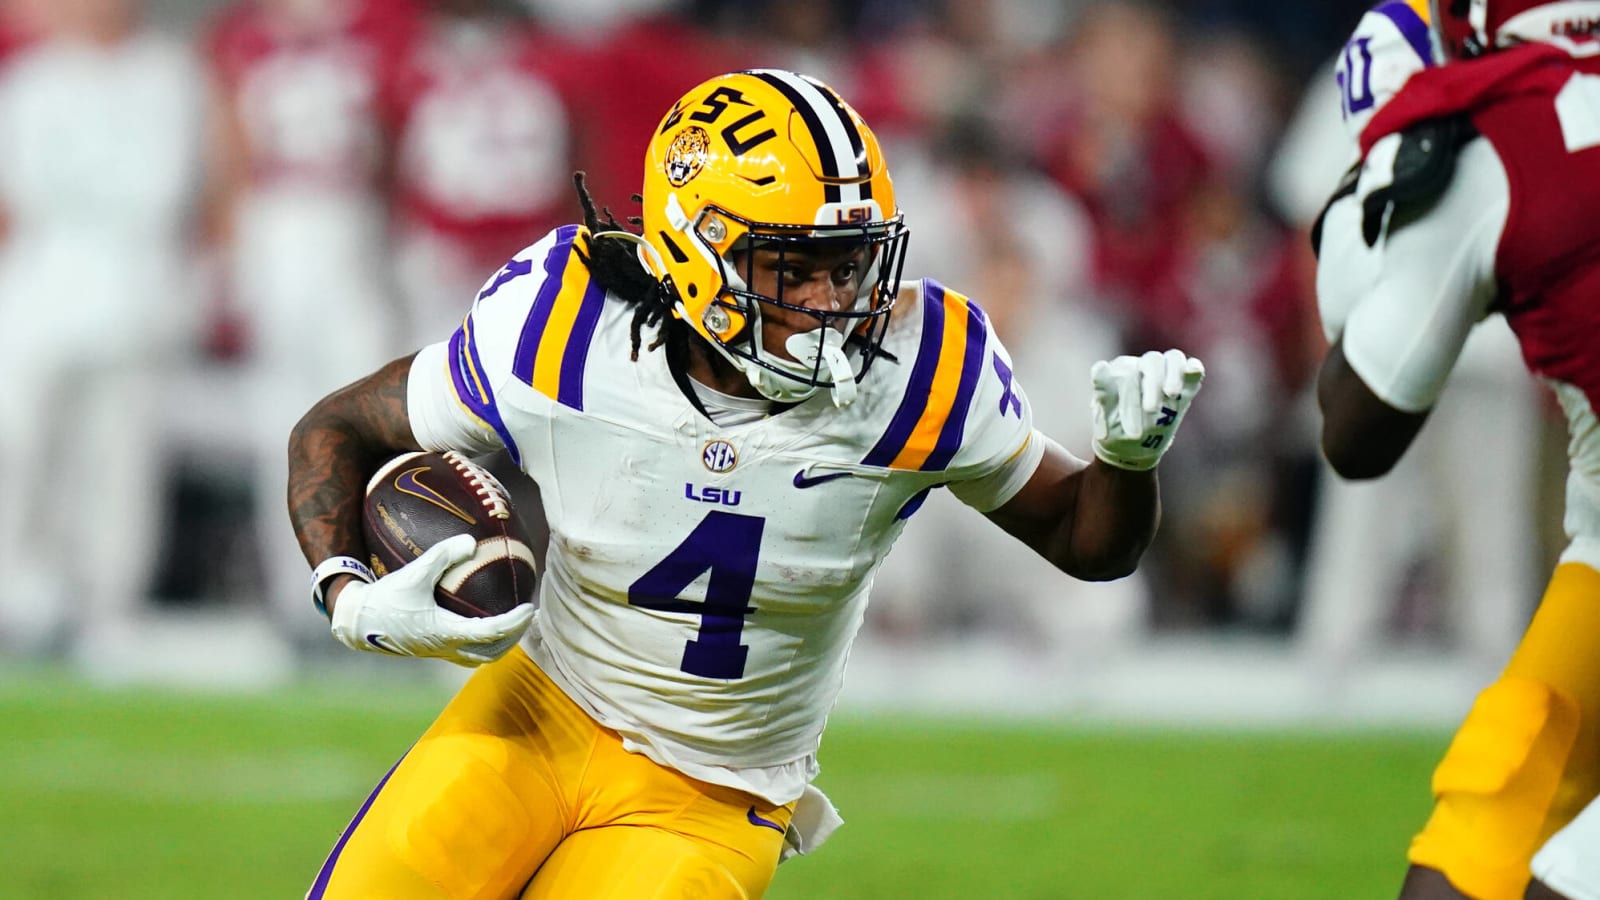  LSU Loses Star Offensive Player To The Transfer Portal, A Key Contributor Responsible For 16 Touchdowns